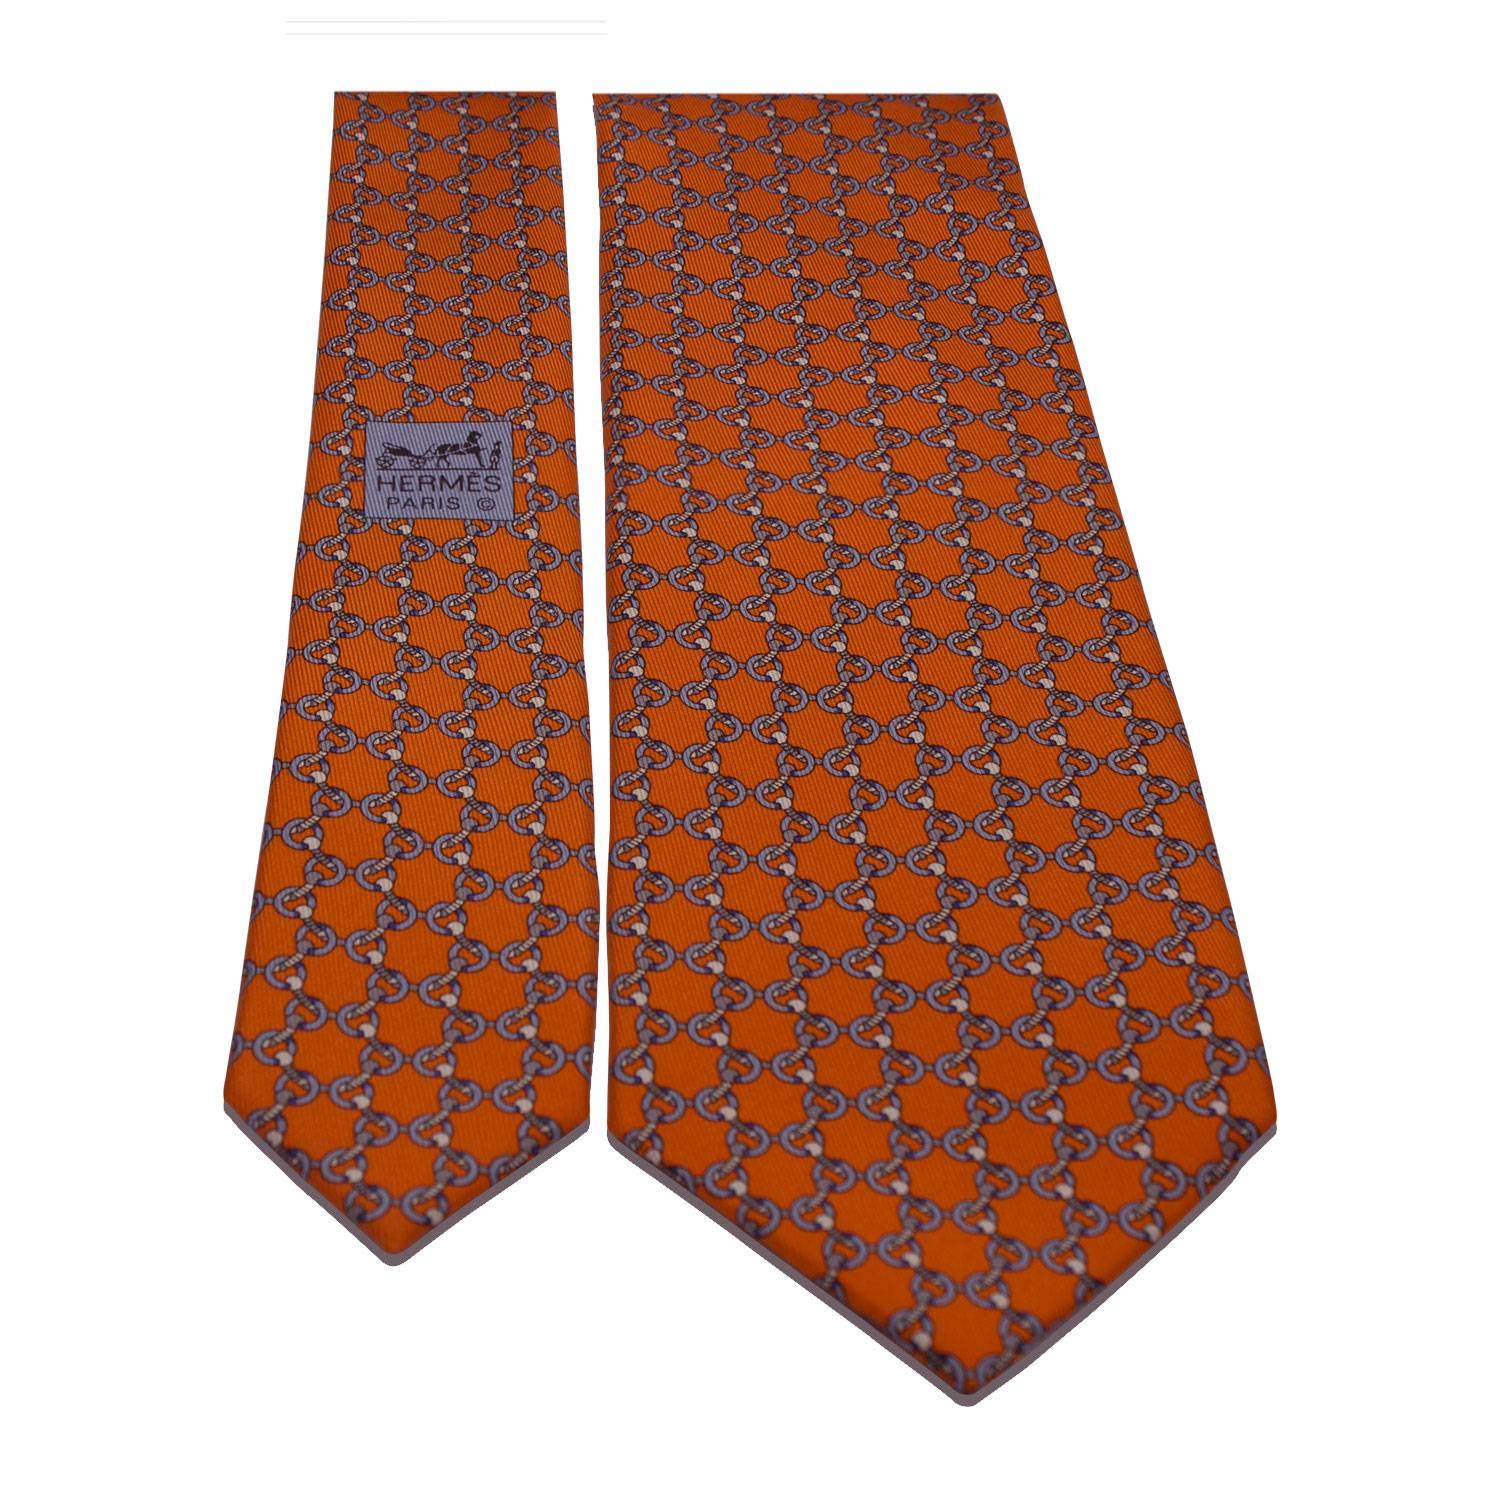 Hermes Cravate/Tie 100% Silk Le Piree Or 8cm Size Orange Vif/Ciel/Gris Clair Color 2016.

Pre-owned and never used. 
Bought it in Hermes store in 2016. 
Size: 8cm. 
Color: Orange Vif/Ciel/Gris Clair. 
Model: Le Piree Or.